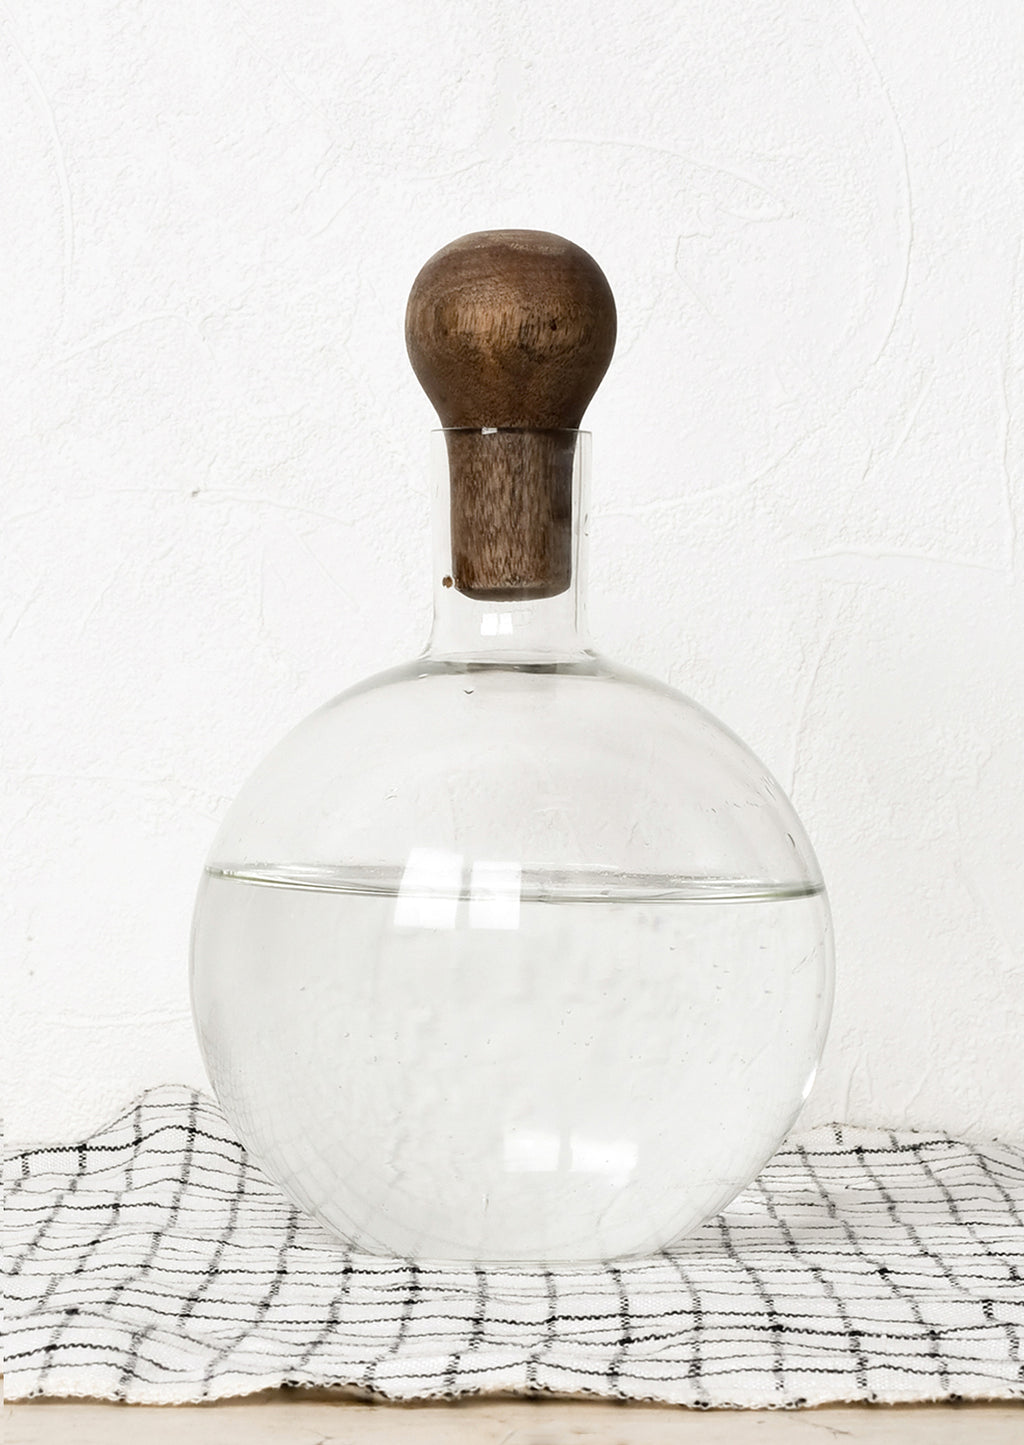 1: A glass decanter in round shape with dark wooden stopper.